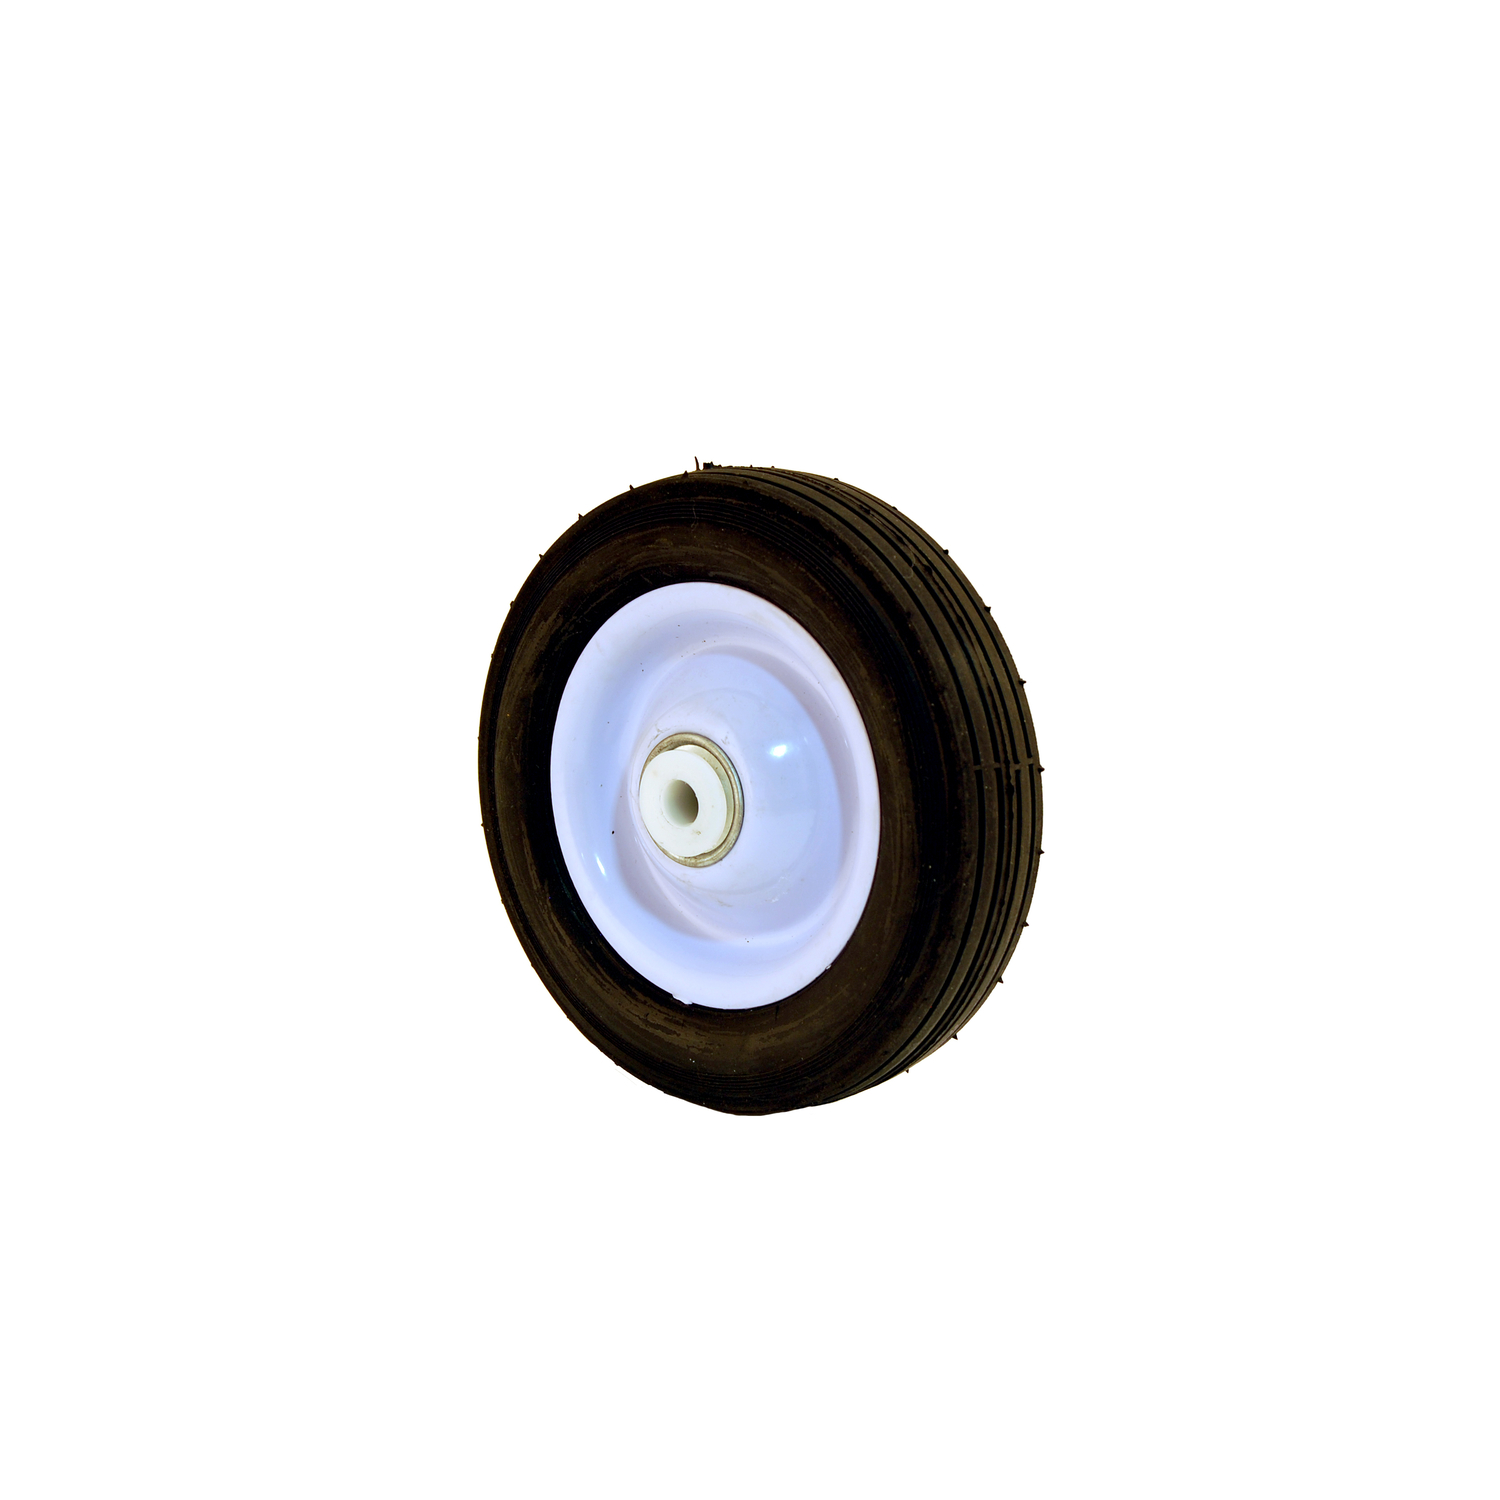 Arnold 1.5 in. W X 6 in. D Steel Lawn Mower Replacement Wheel 50 lb